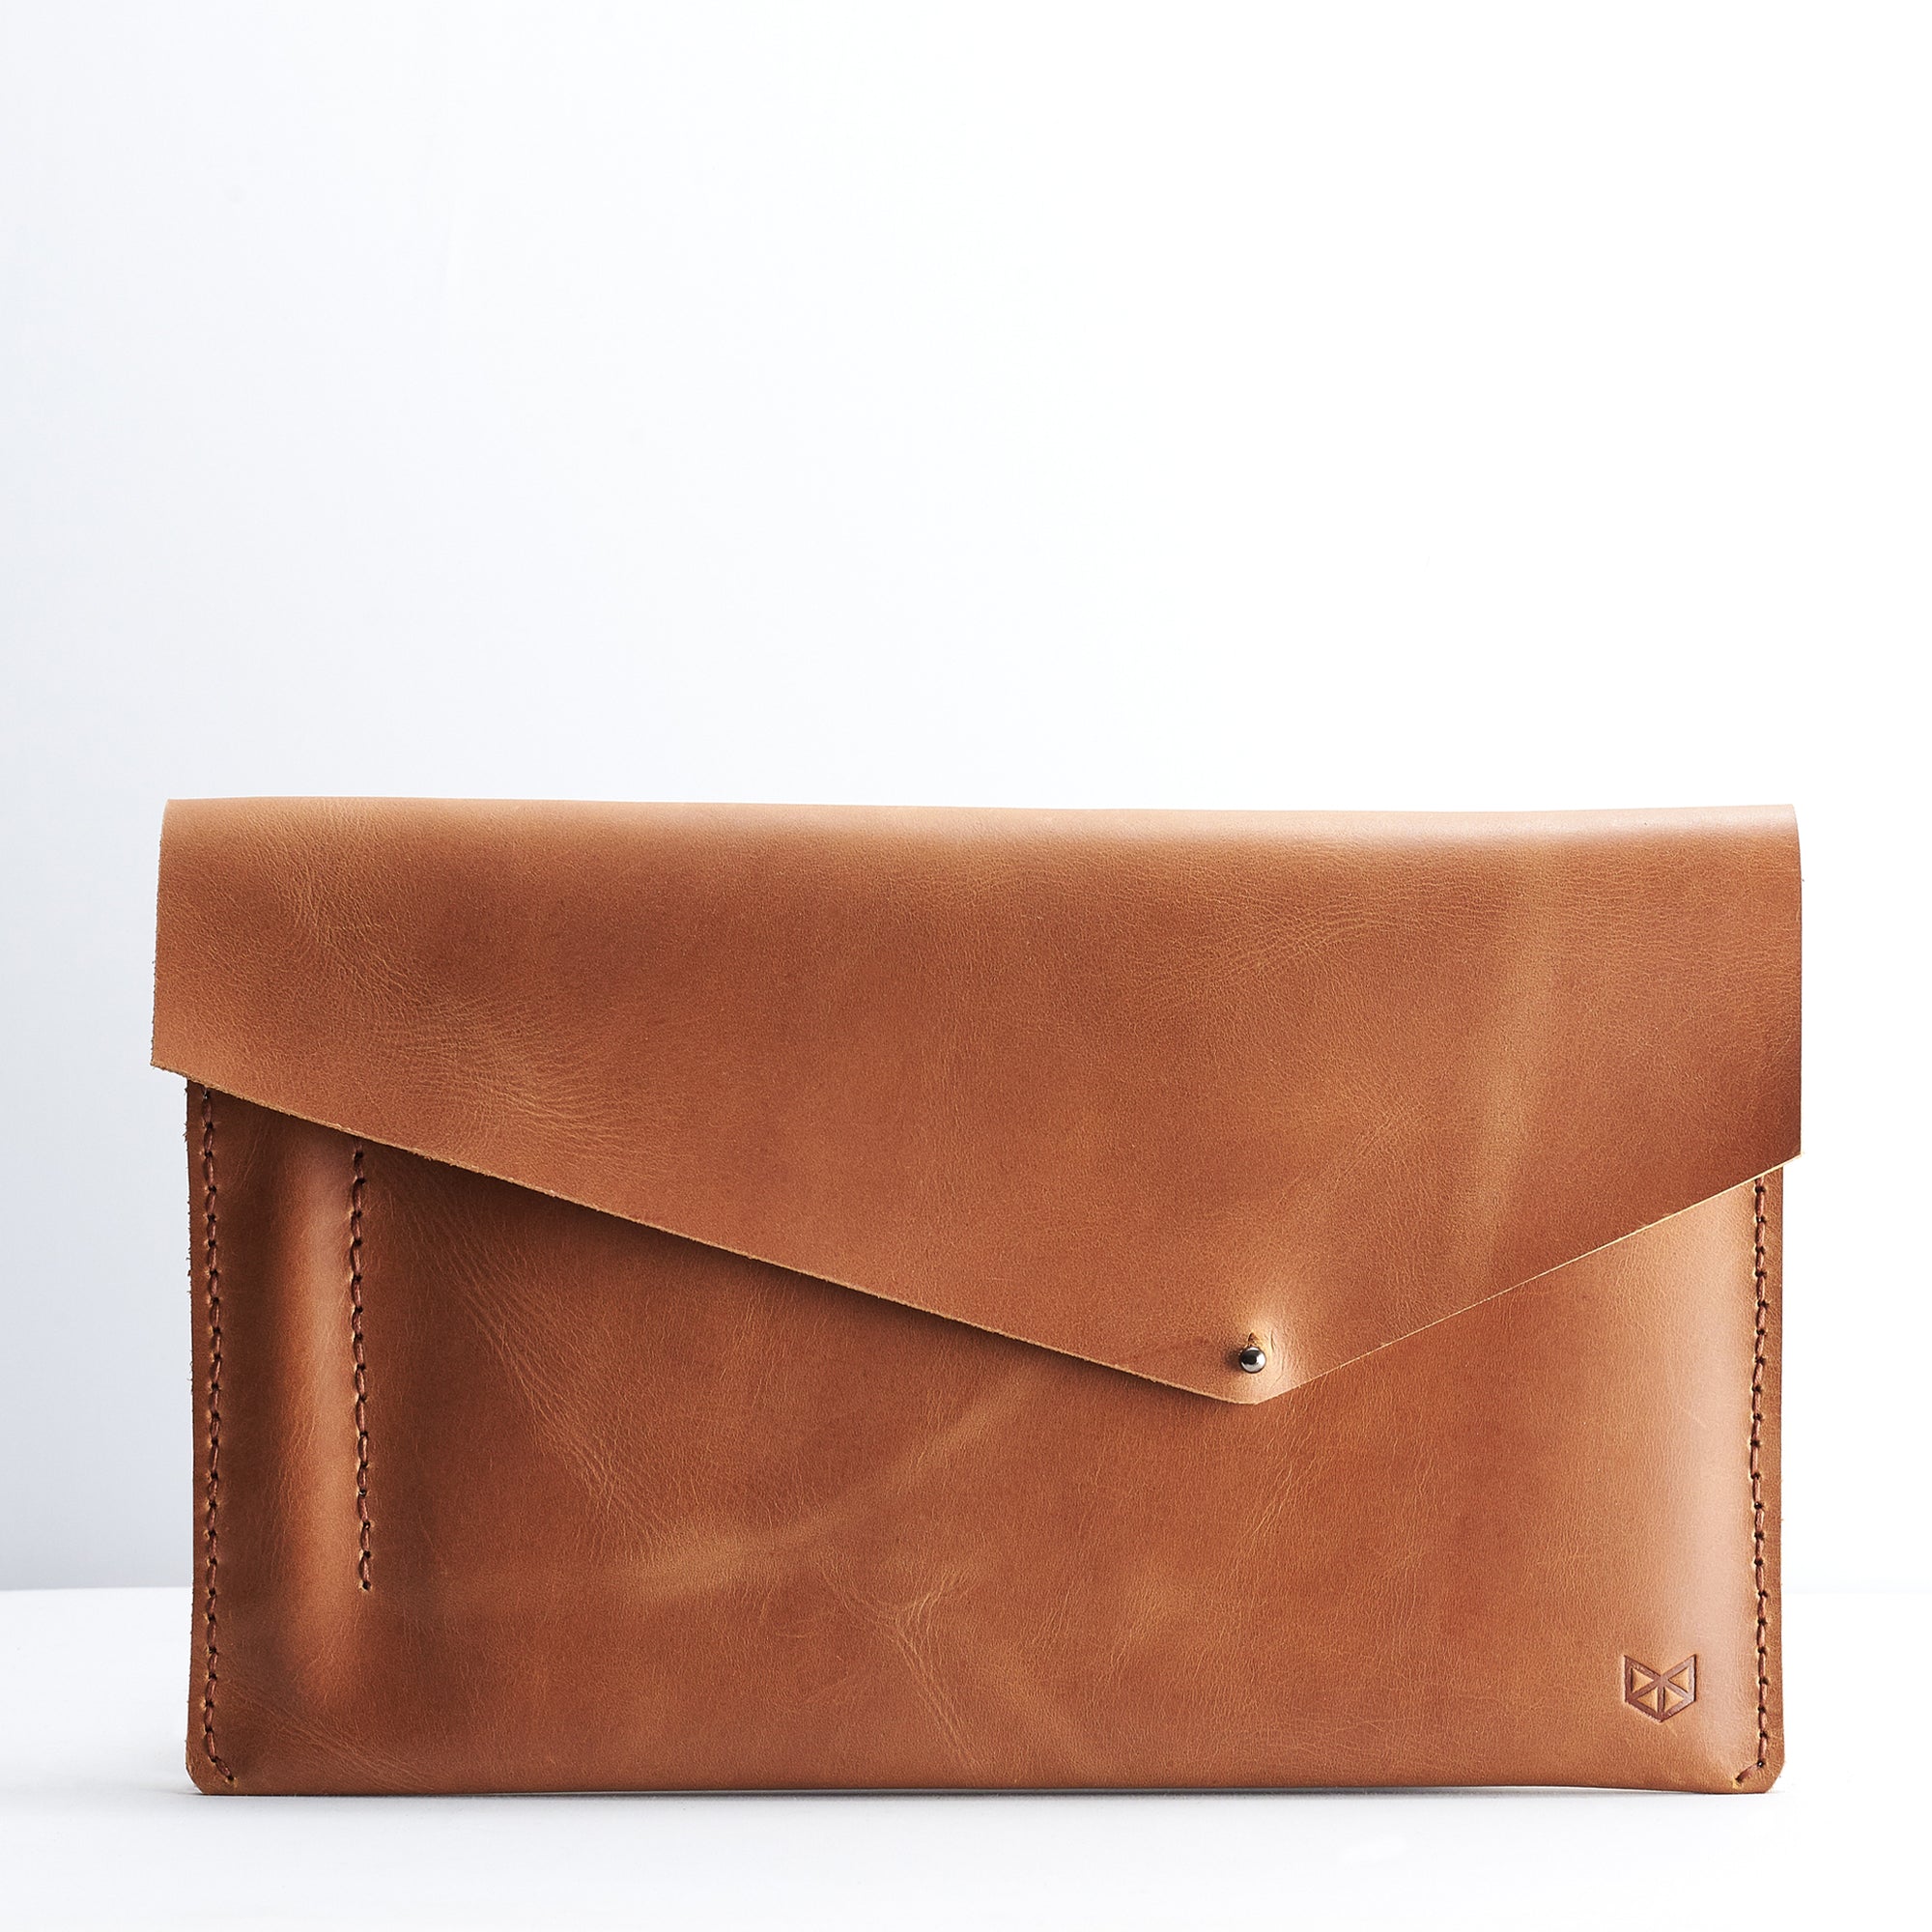 Closed. iPad Sleeve. iPad Leather Case Tan With Apple Pencil Holder by Capra Leather